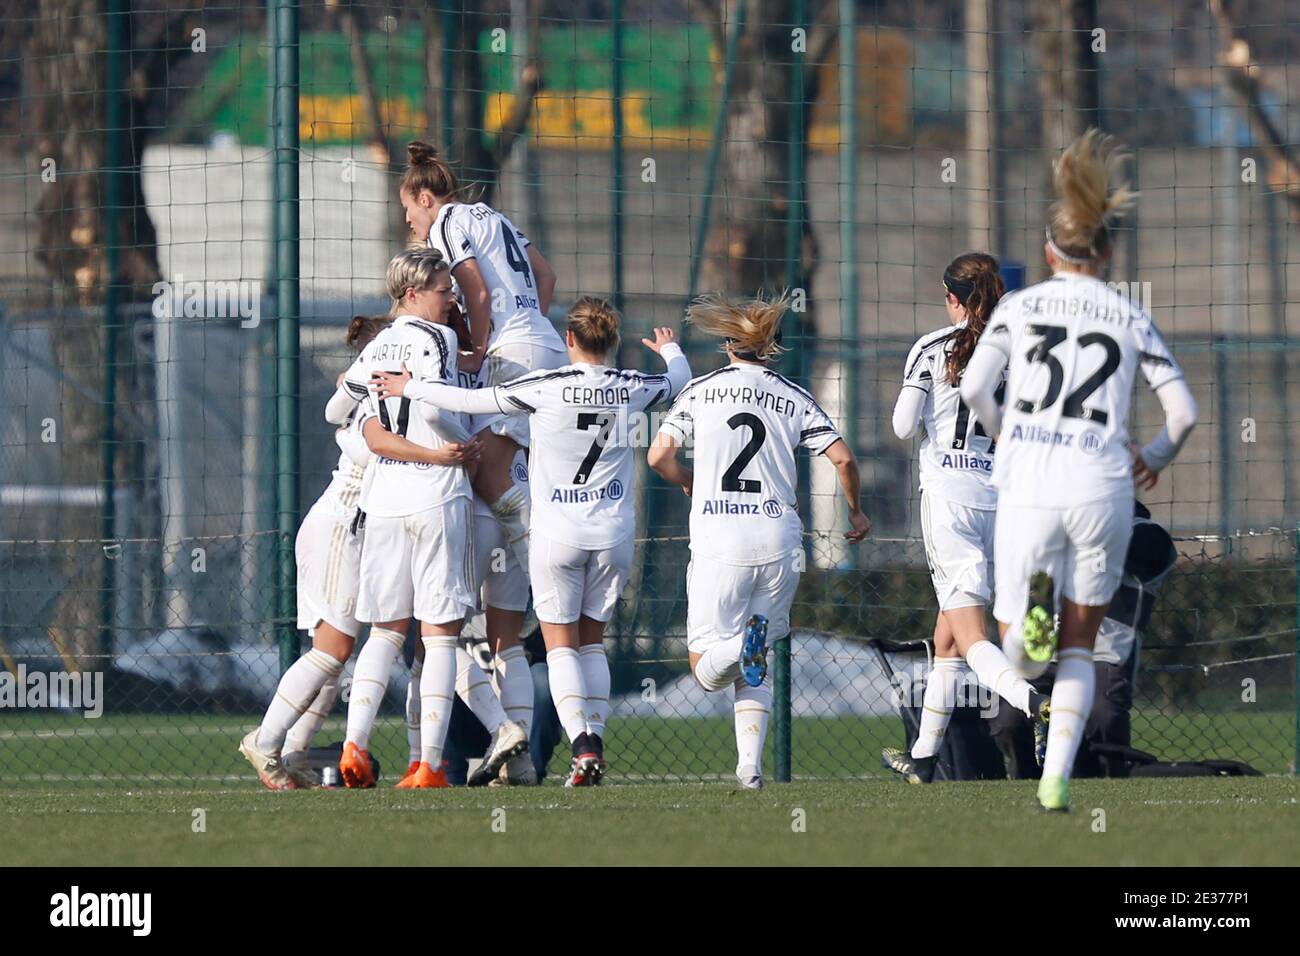 Milan, Italy. 17th Jan, 2021. Milan, Italy, Suning Youth Development Centre in Memory of Giacinto Facchetti, January 17, 2021, Cristiana Girelli (Juventus FC) celebrates after scoring the opener during FC Internazionale vs Juventus Women - Italian football Serie A Women match Credit: Francesco Scaccianoce/LPS/ZUMA Wire/Alamy Live News Stock Photo